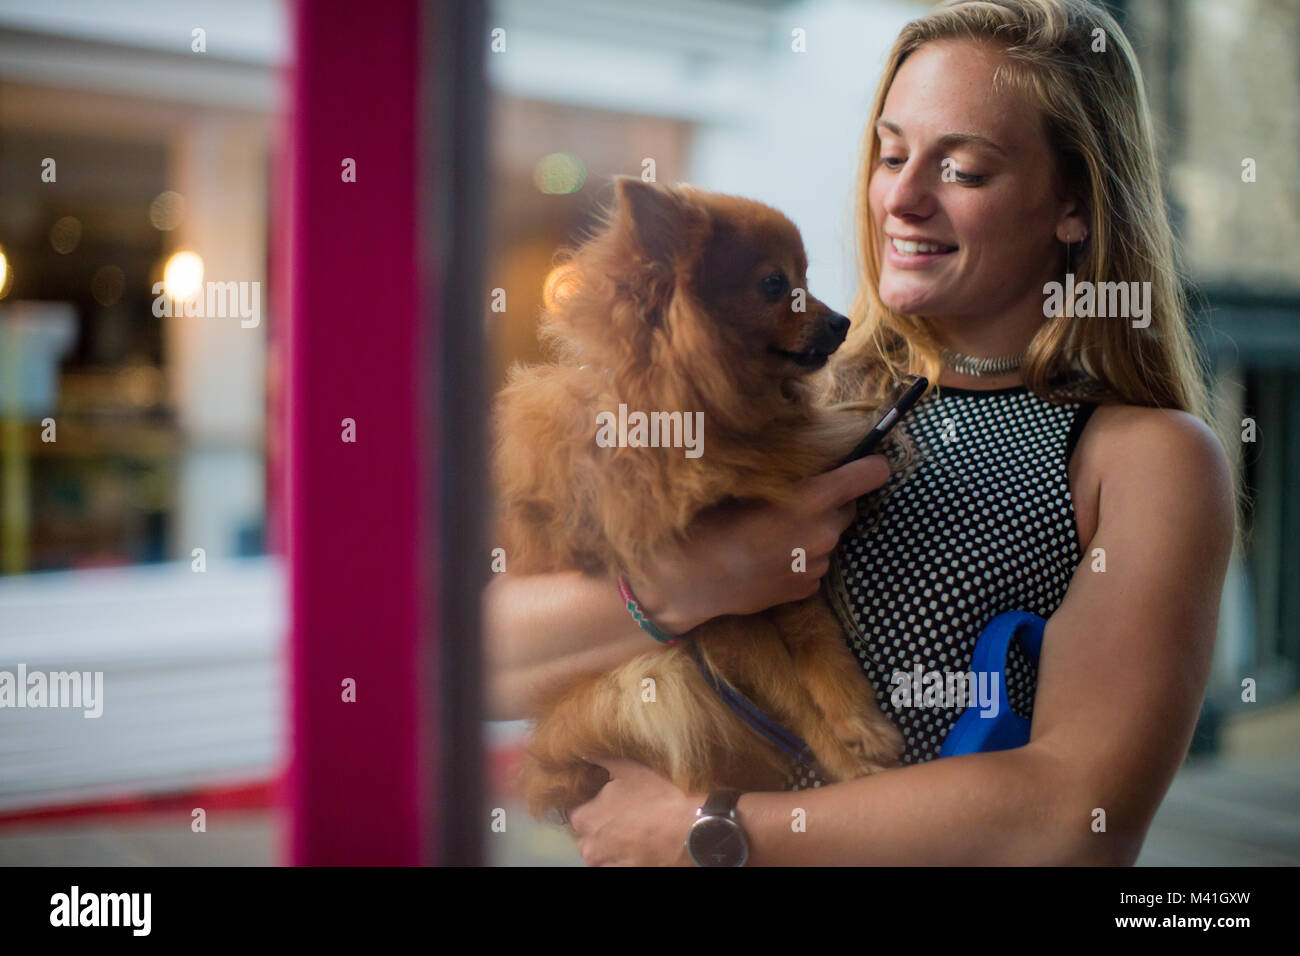 Young Female shopping with her pet dog Stock Photo